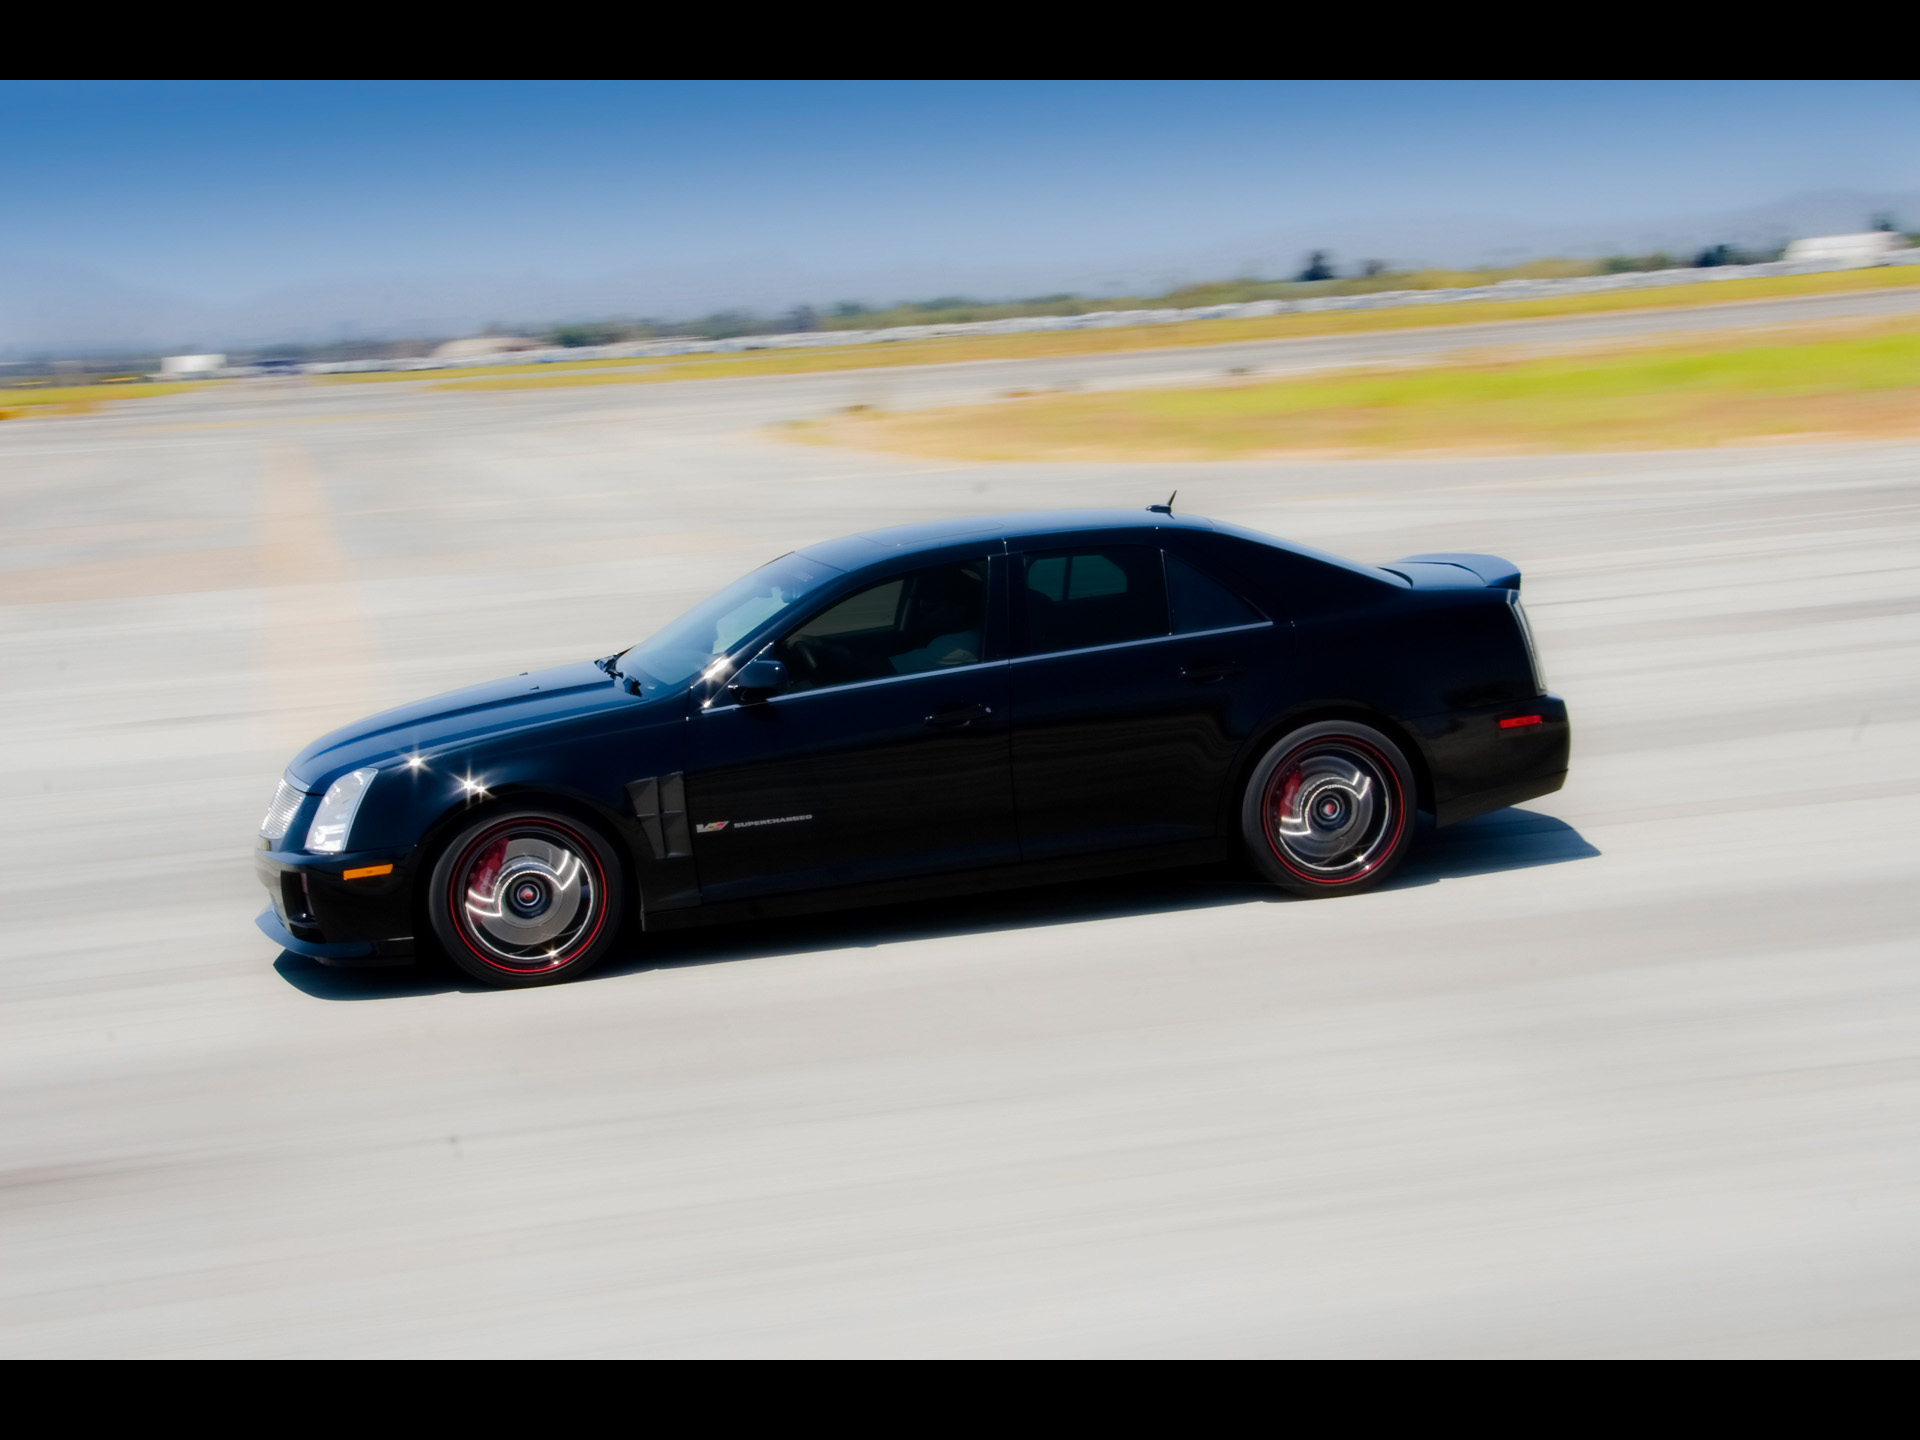 You can vote for this D3 Cadillac STS-V photo